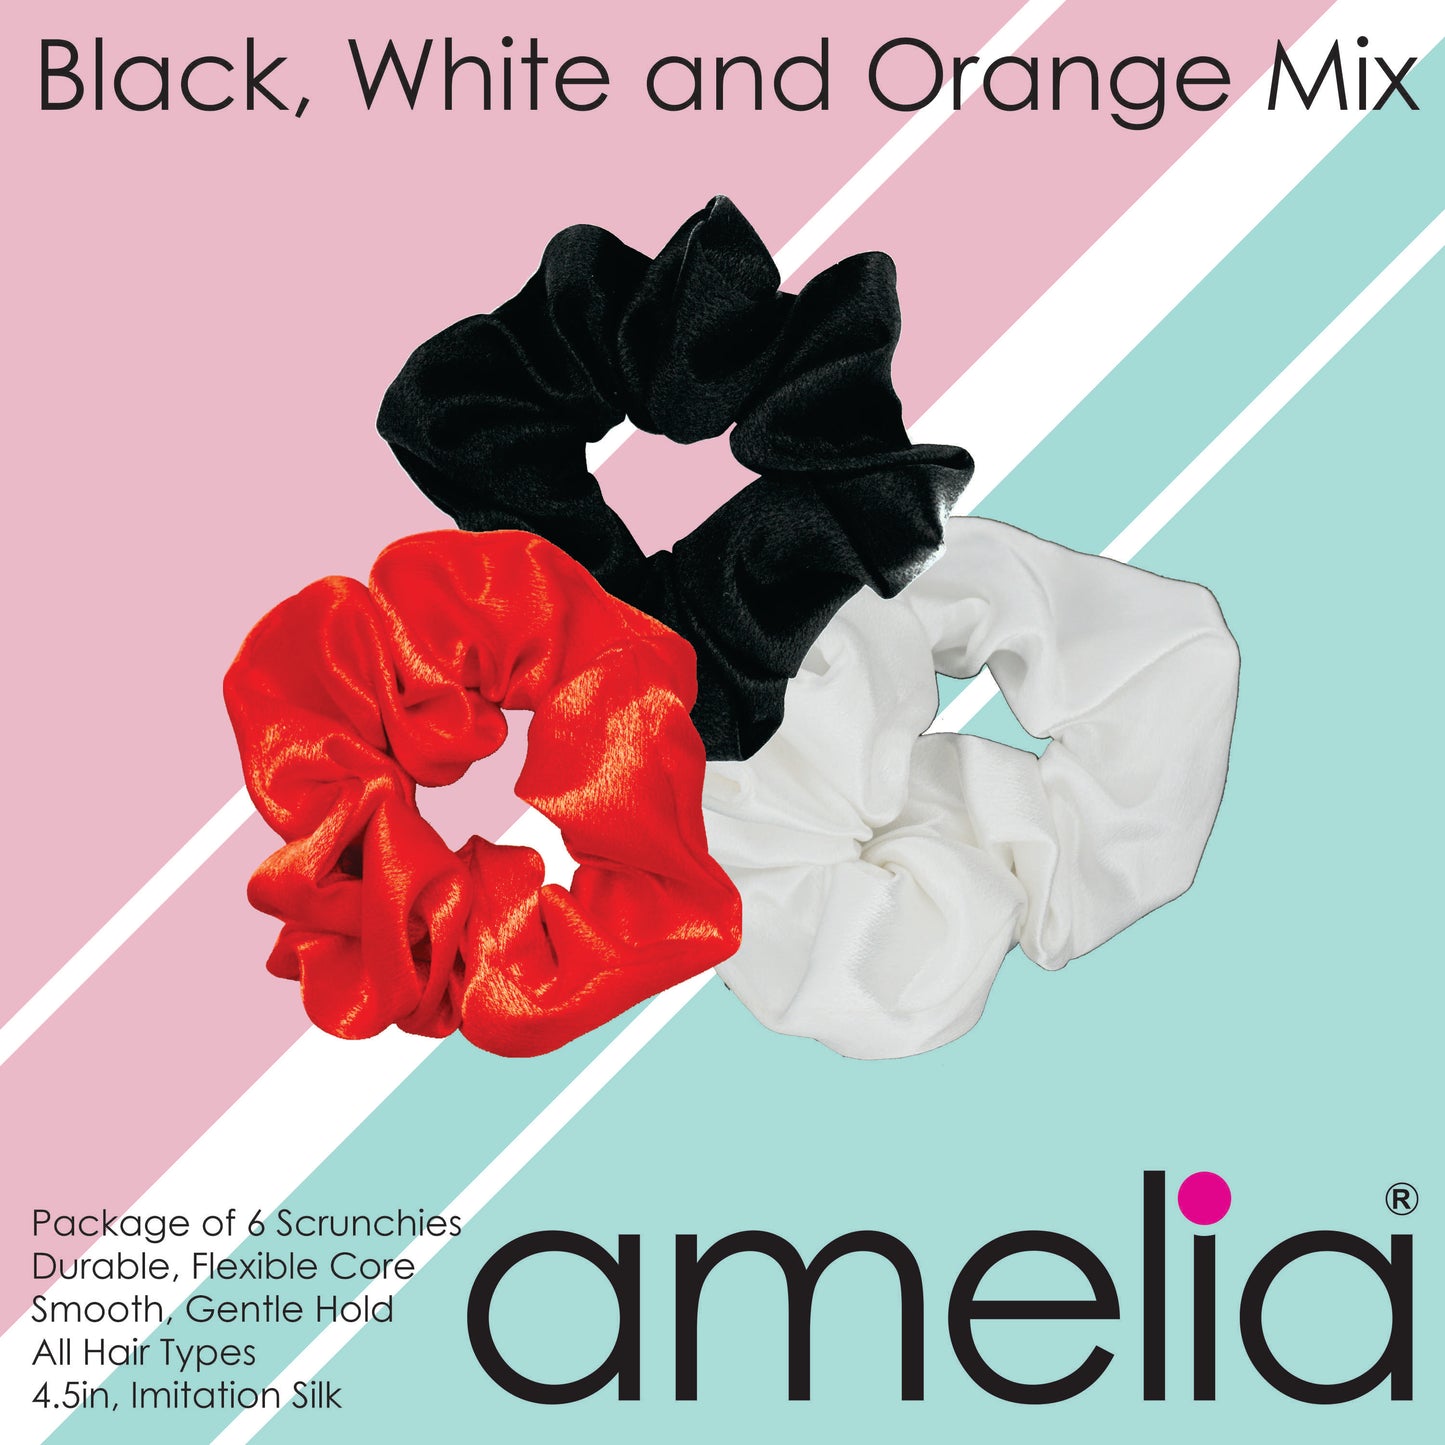 Amelia Beauty Products, Black, White and Orange Mix, Imitation Silk Scrunchies, 4.5in Diameter, Gentle on Hair, Strong Hold, No Snag, No Dents or Creases. 6 Pack